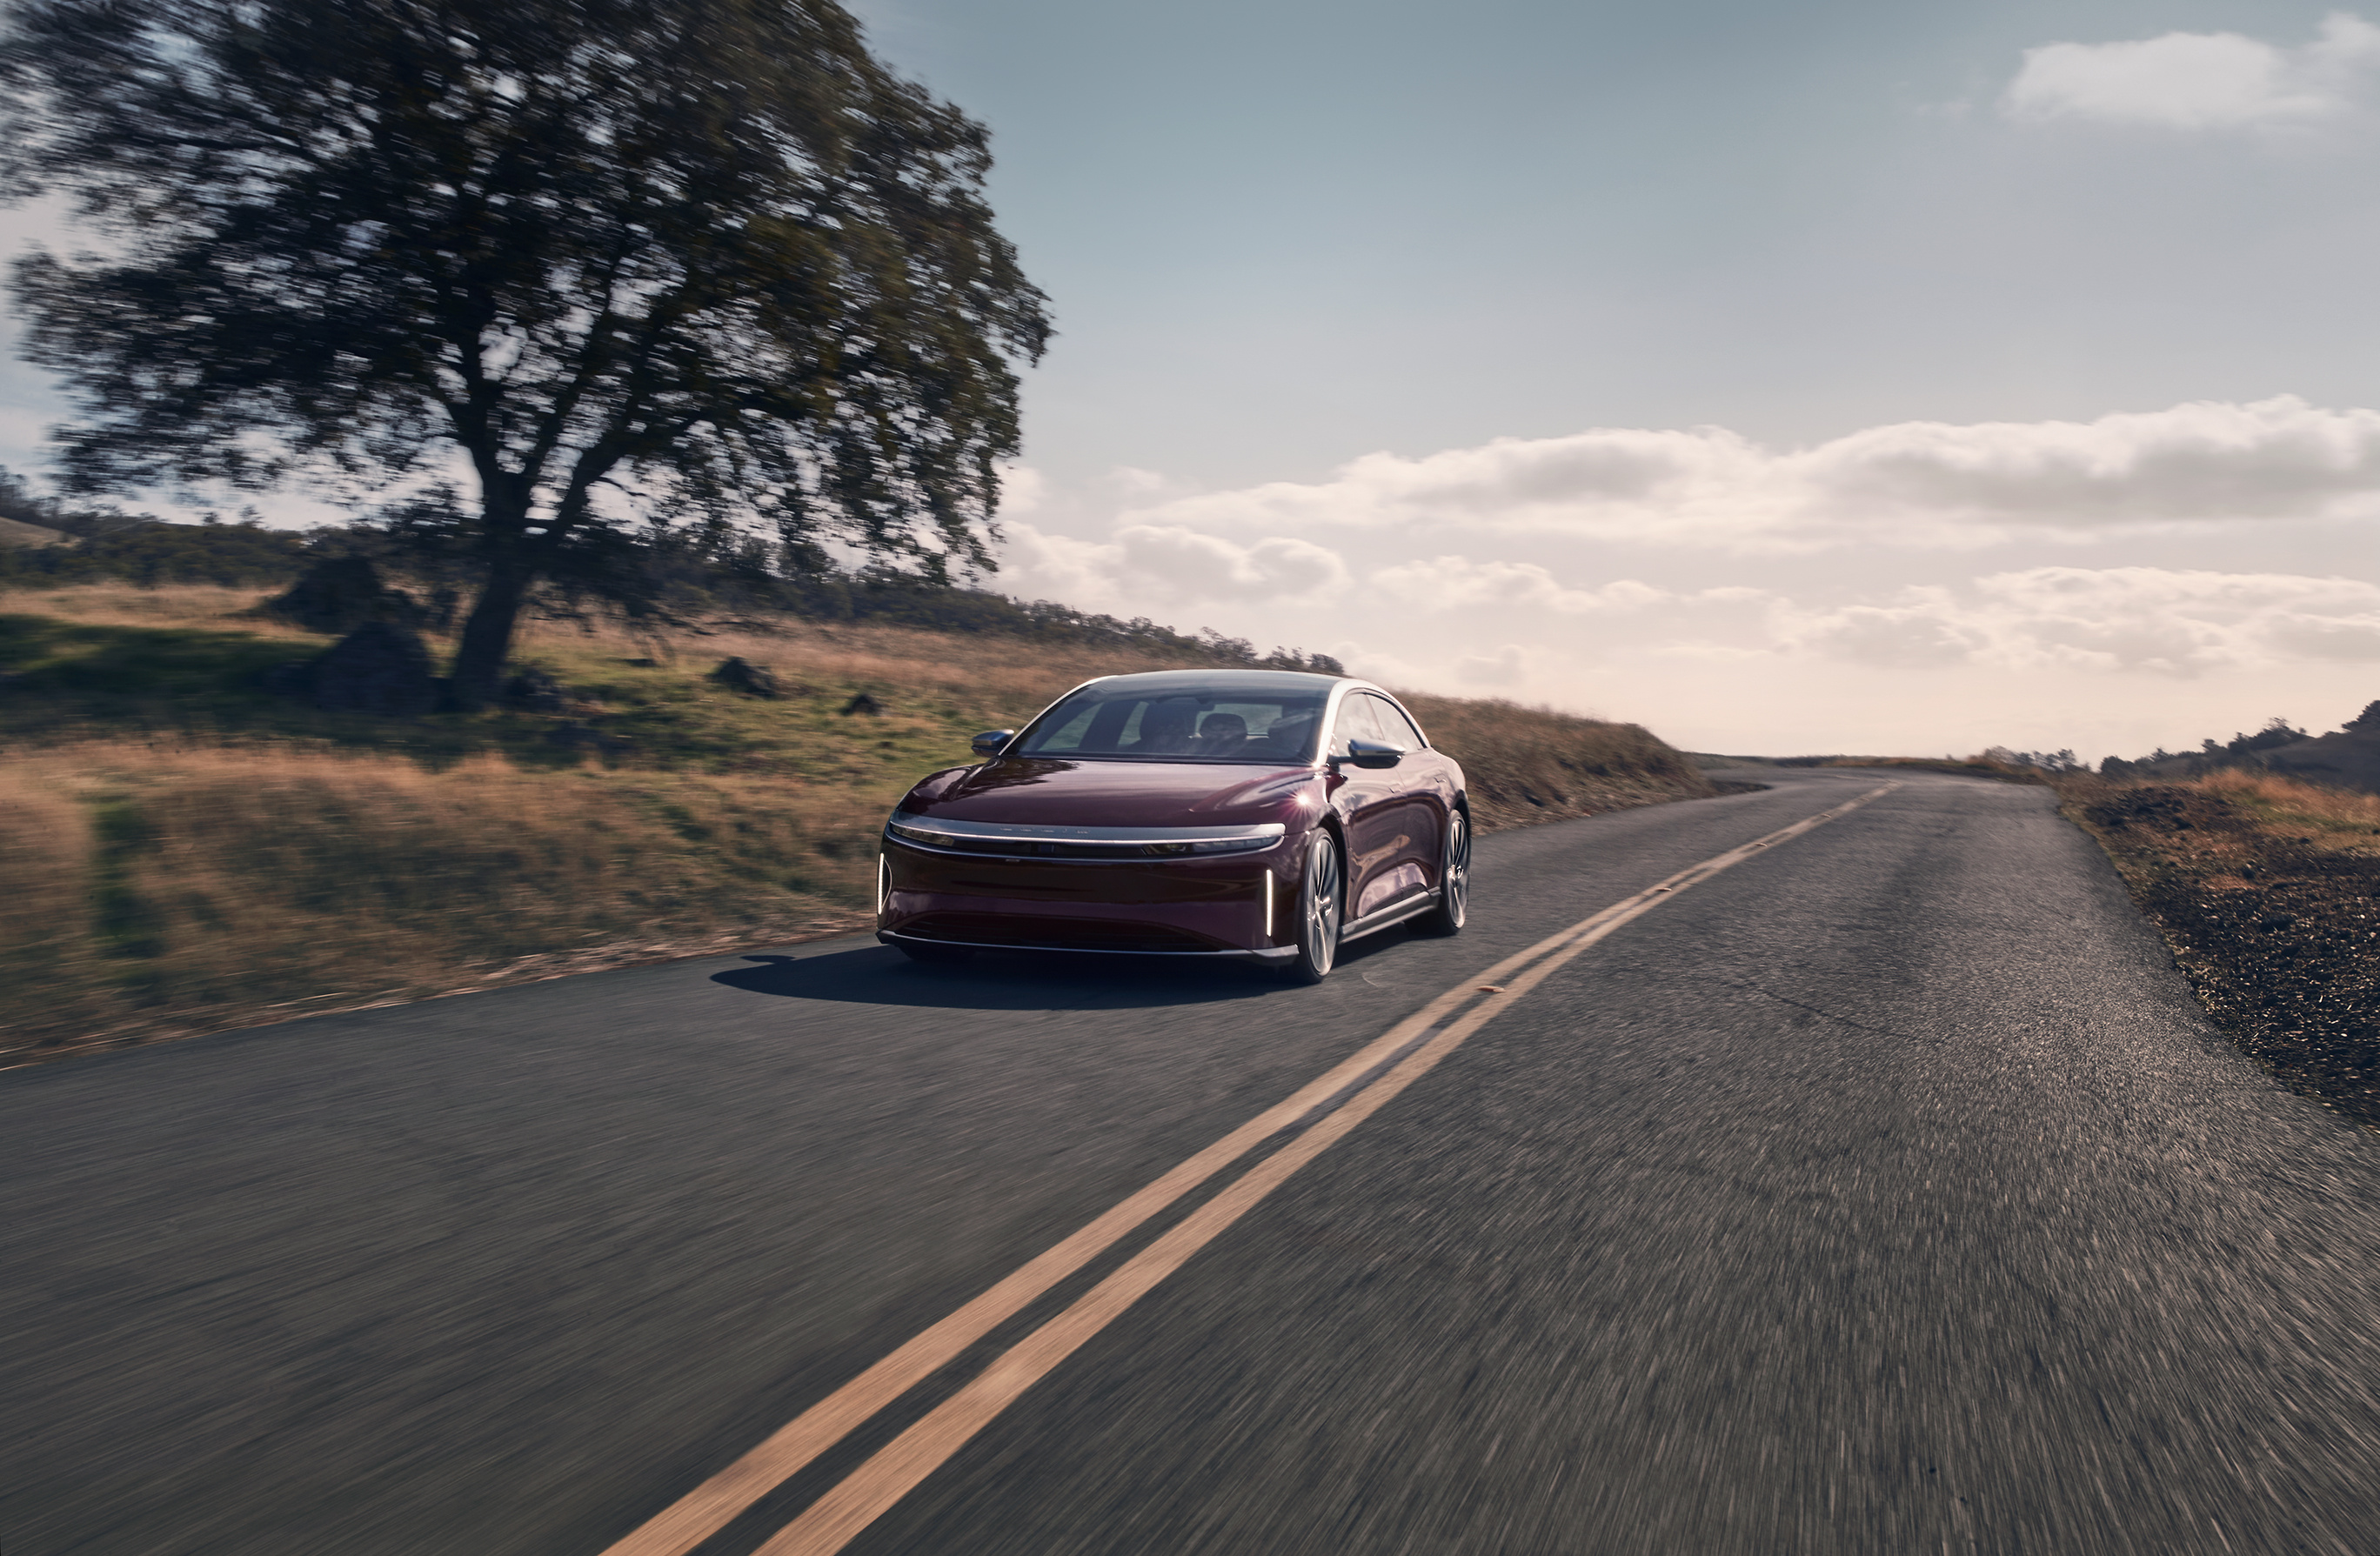 Lucid Motors Auto, Grand touring experience, Luxury electric vehicle, Thrilling performance, 2740x1790 HD Desktop